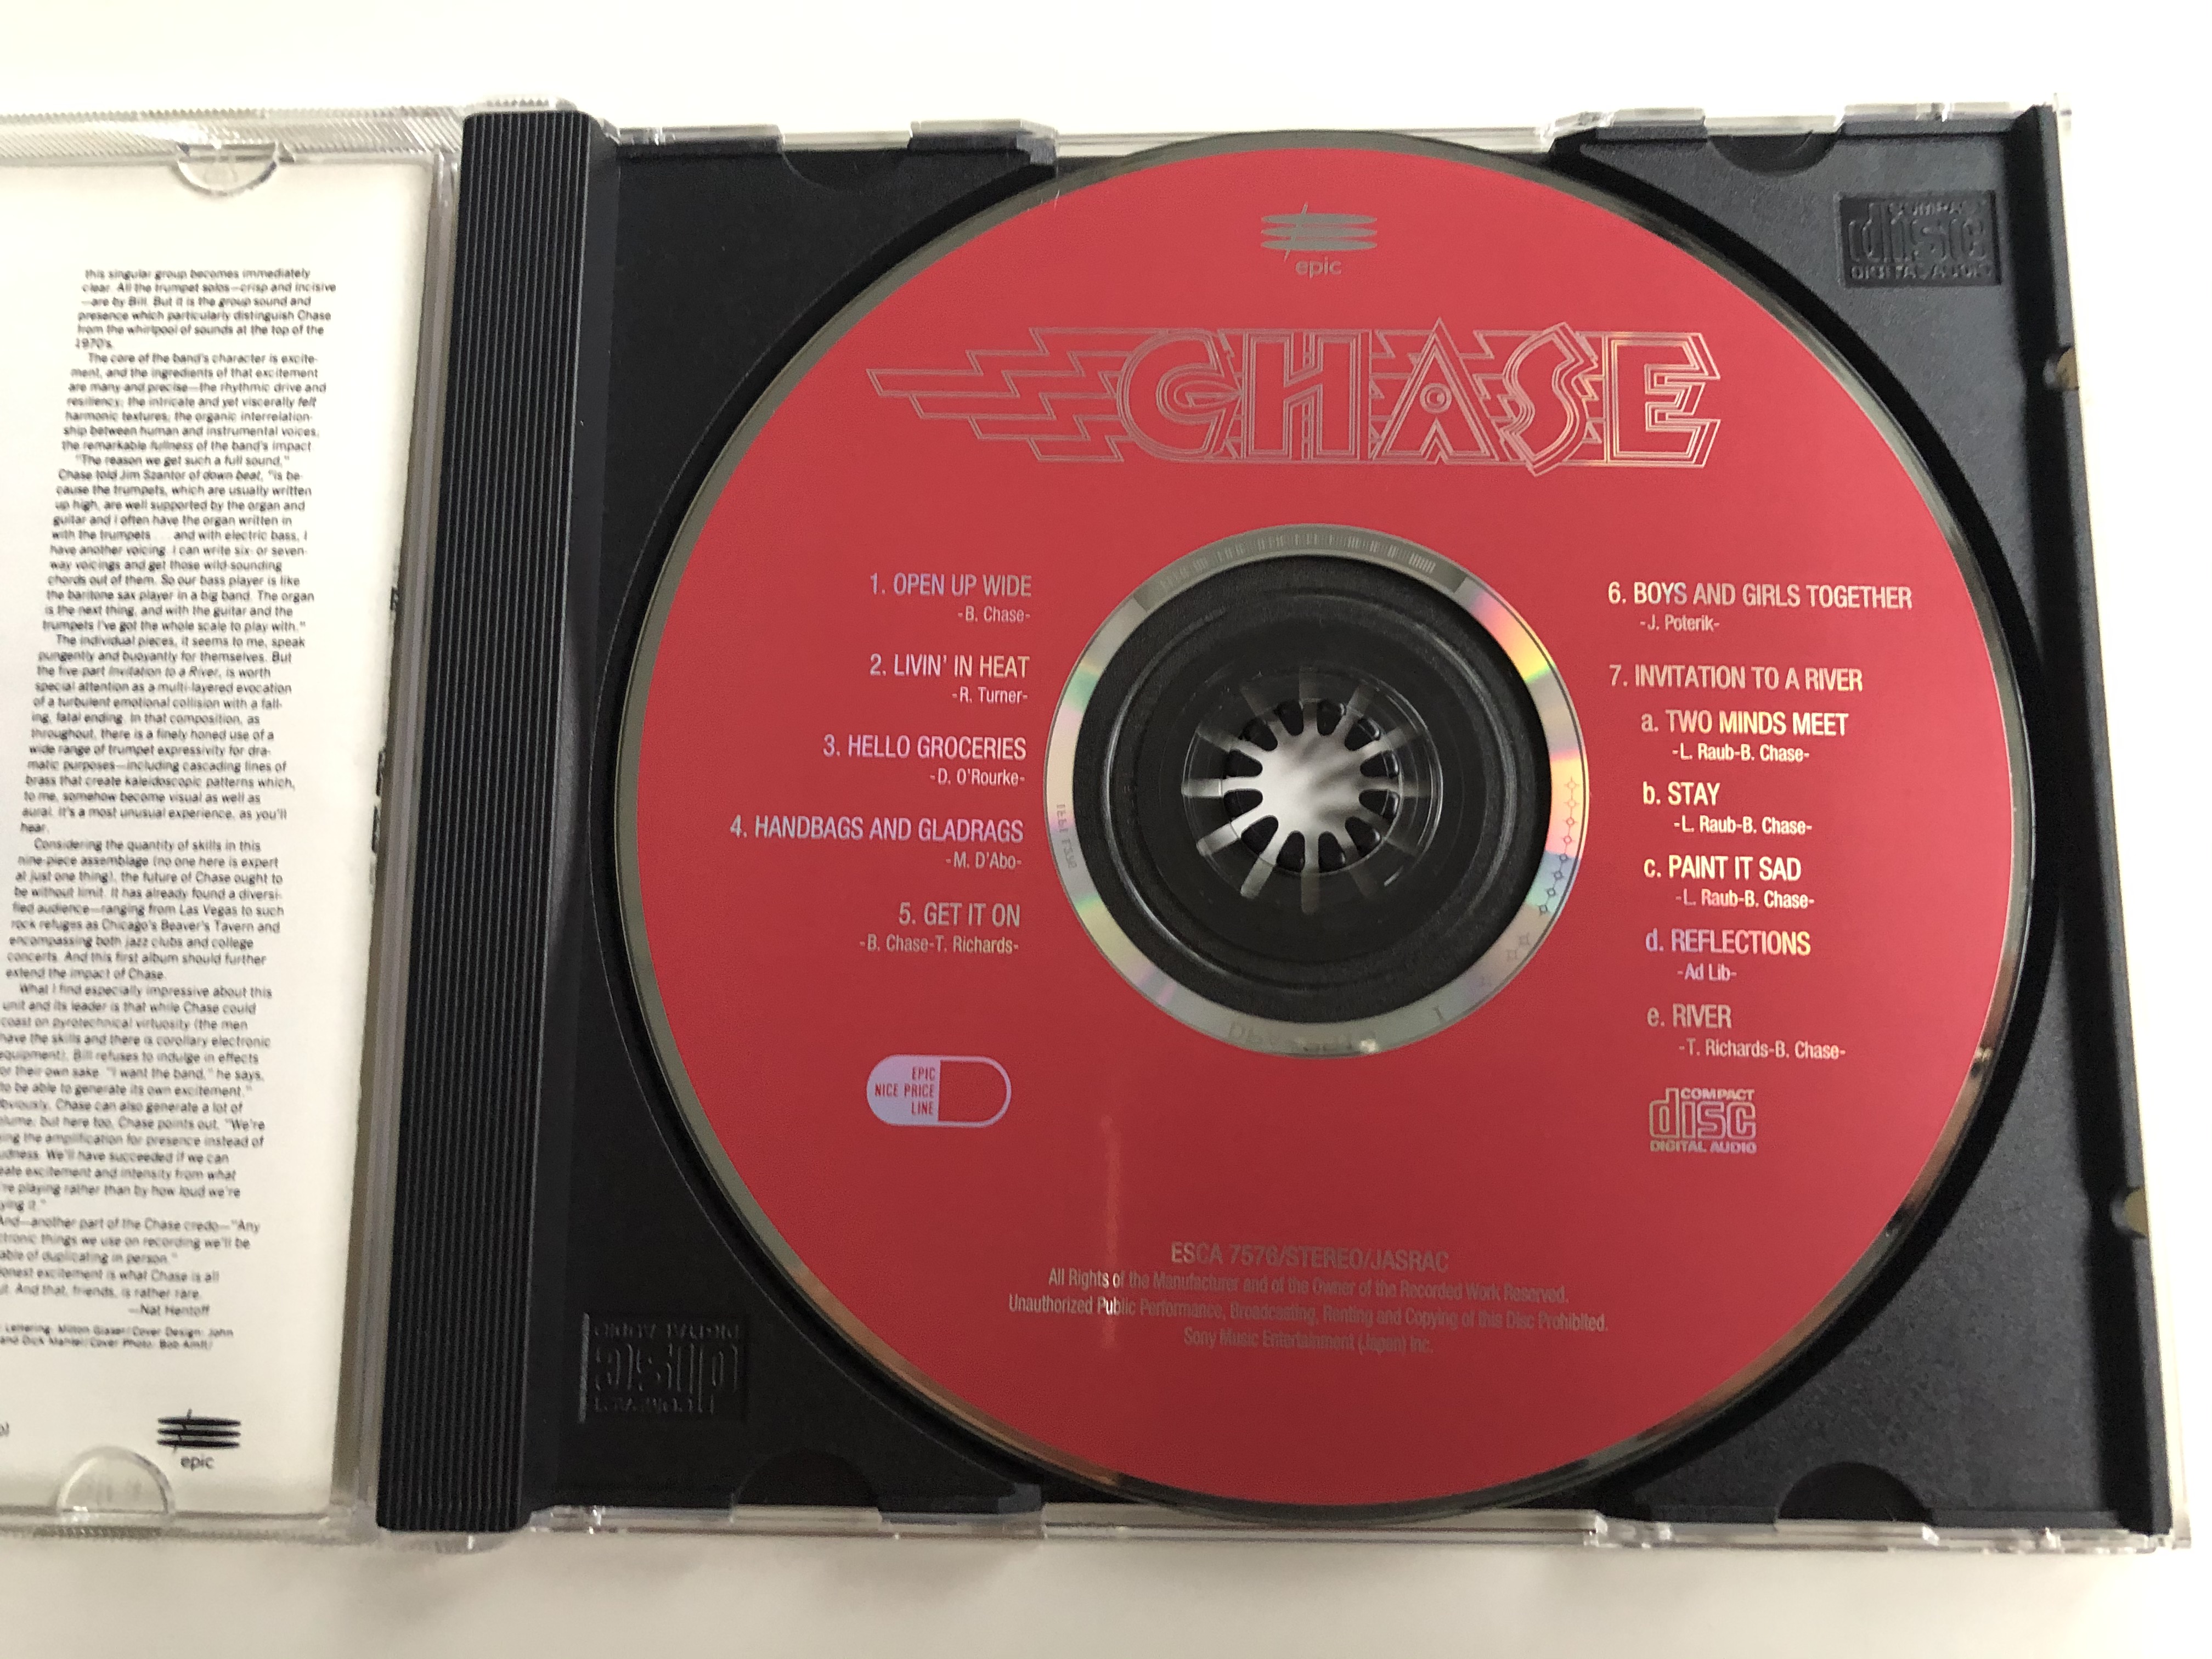 chase-epic-audio-cd-stereo-esca-7576-3-.jpg